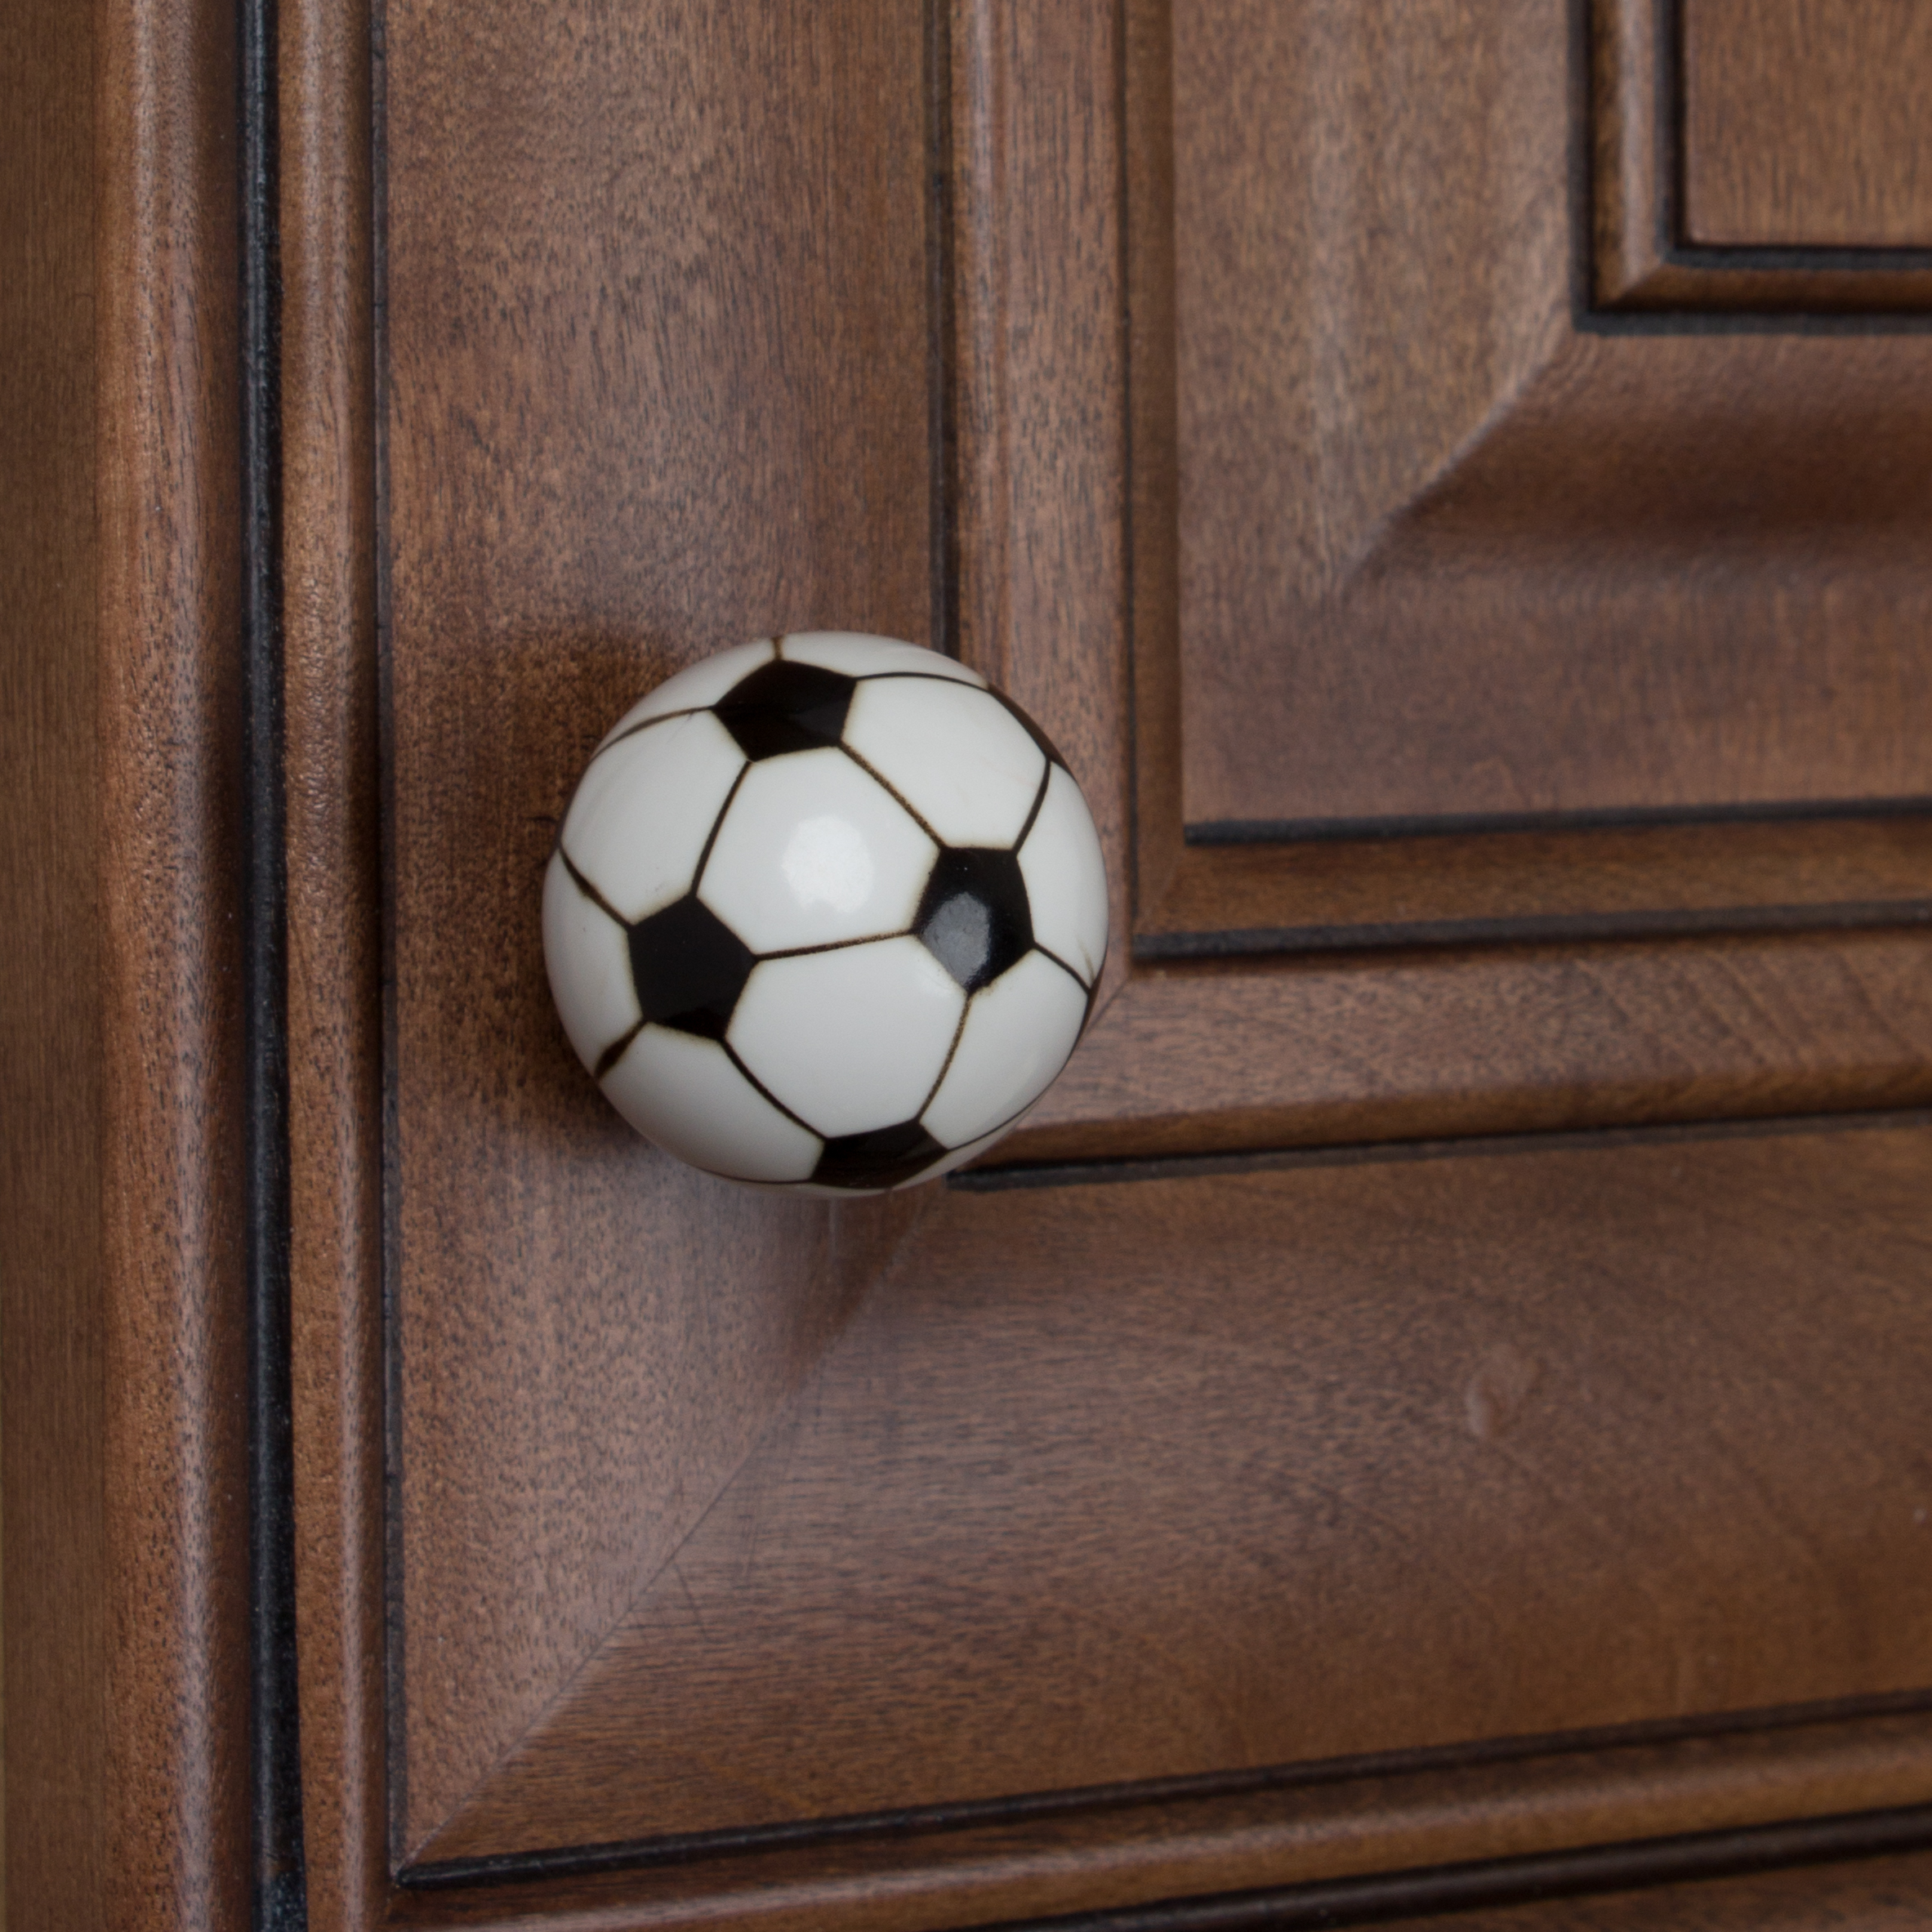 GlideRite 1-1/4 in. Soccer Ball Sports Dresser Drawer Cabinet Knobs, Pack of 25 - image 3 of 4